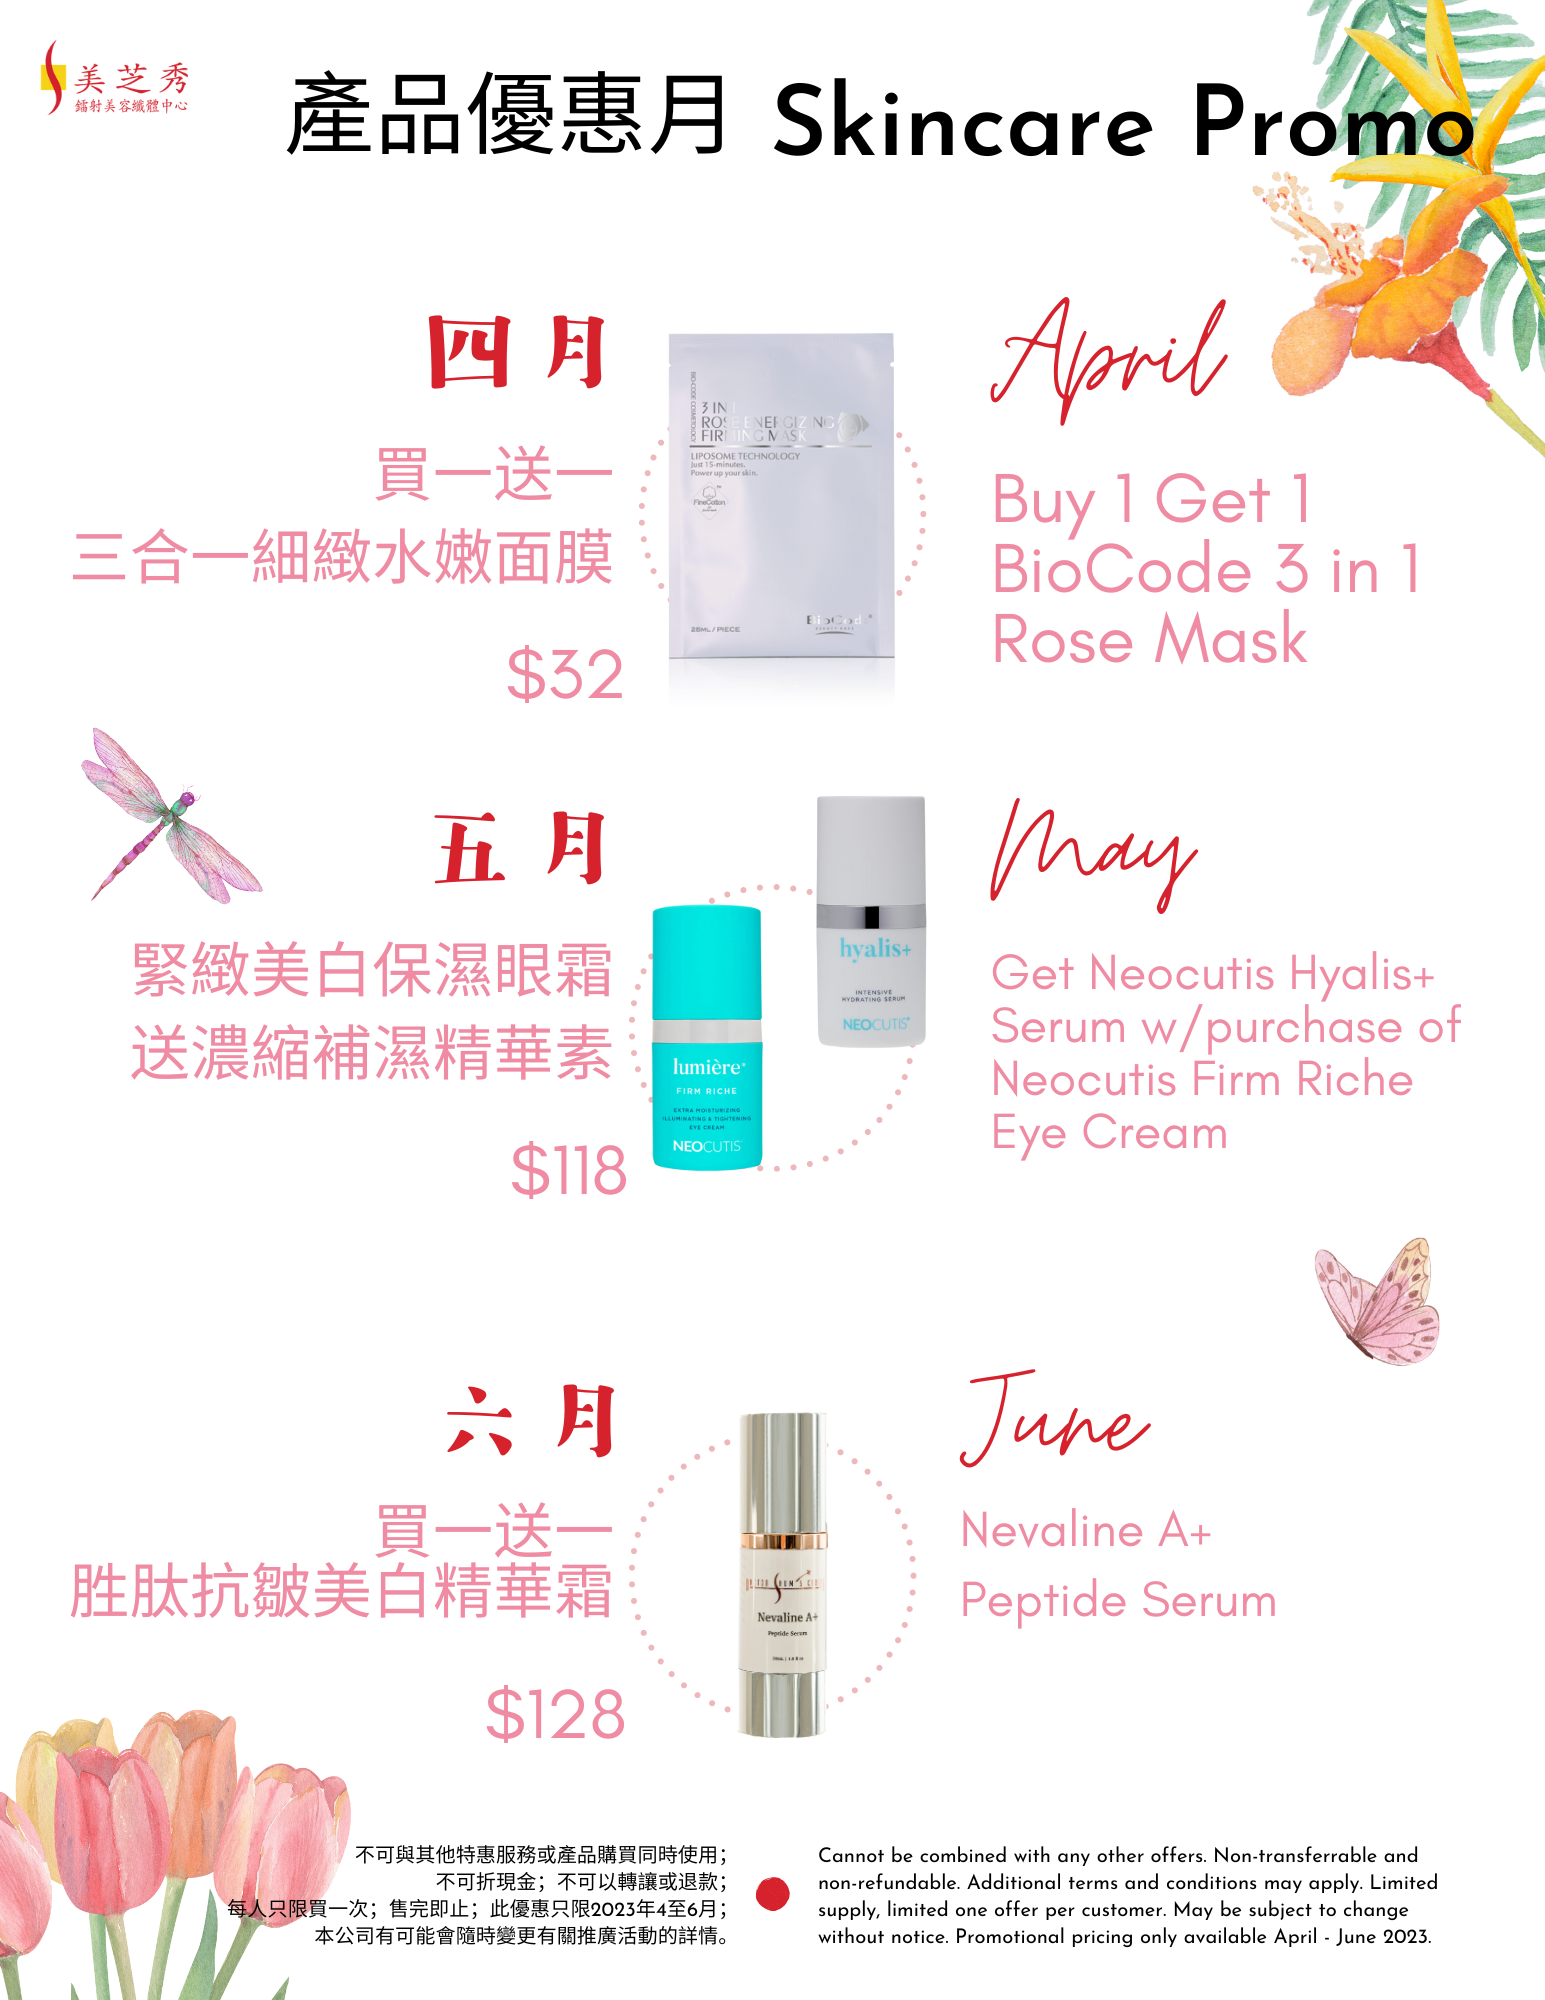 DSC 2023 Q2 BOGO and special offer skincare products from April to June 2023, with BioCode 3 in 1 Rose Energizing Firming Sheet Masks, Neocutis Lumiere Riche Eye Cream, Neocutis Hyalis+ Serum, & Nevaline A+ Peptide Serum products from top to bottom and summer motif of flowers and butterflies